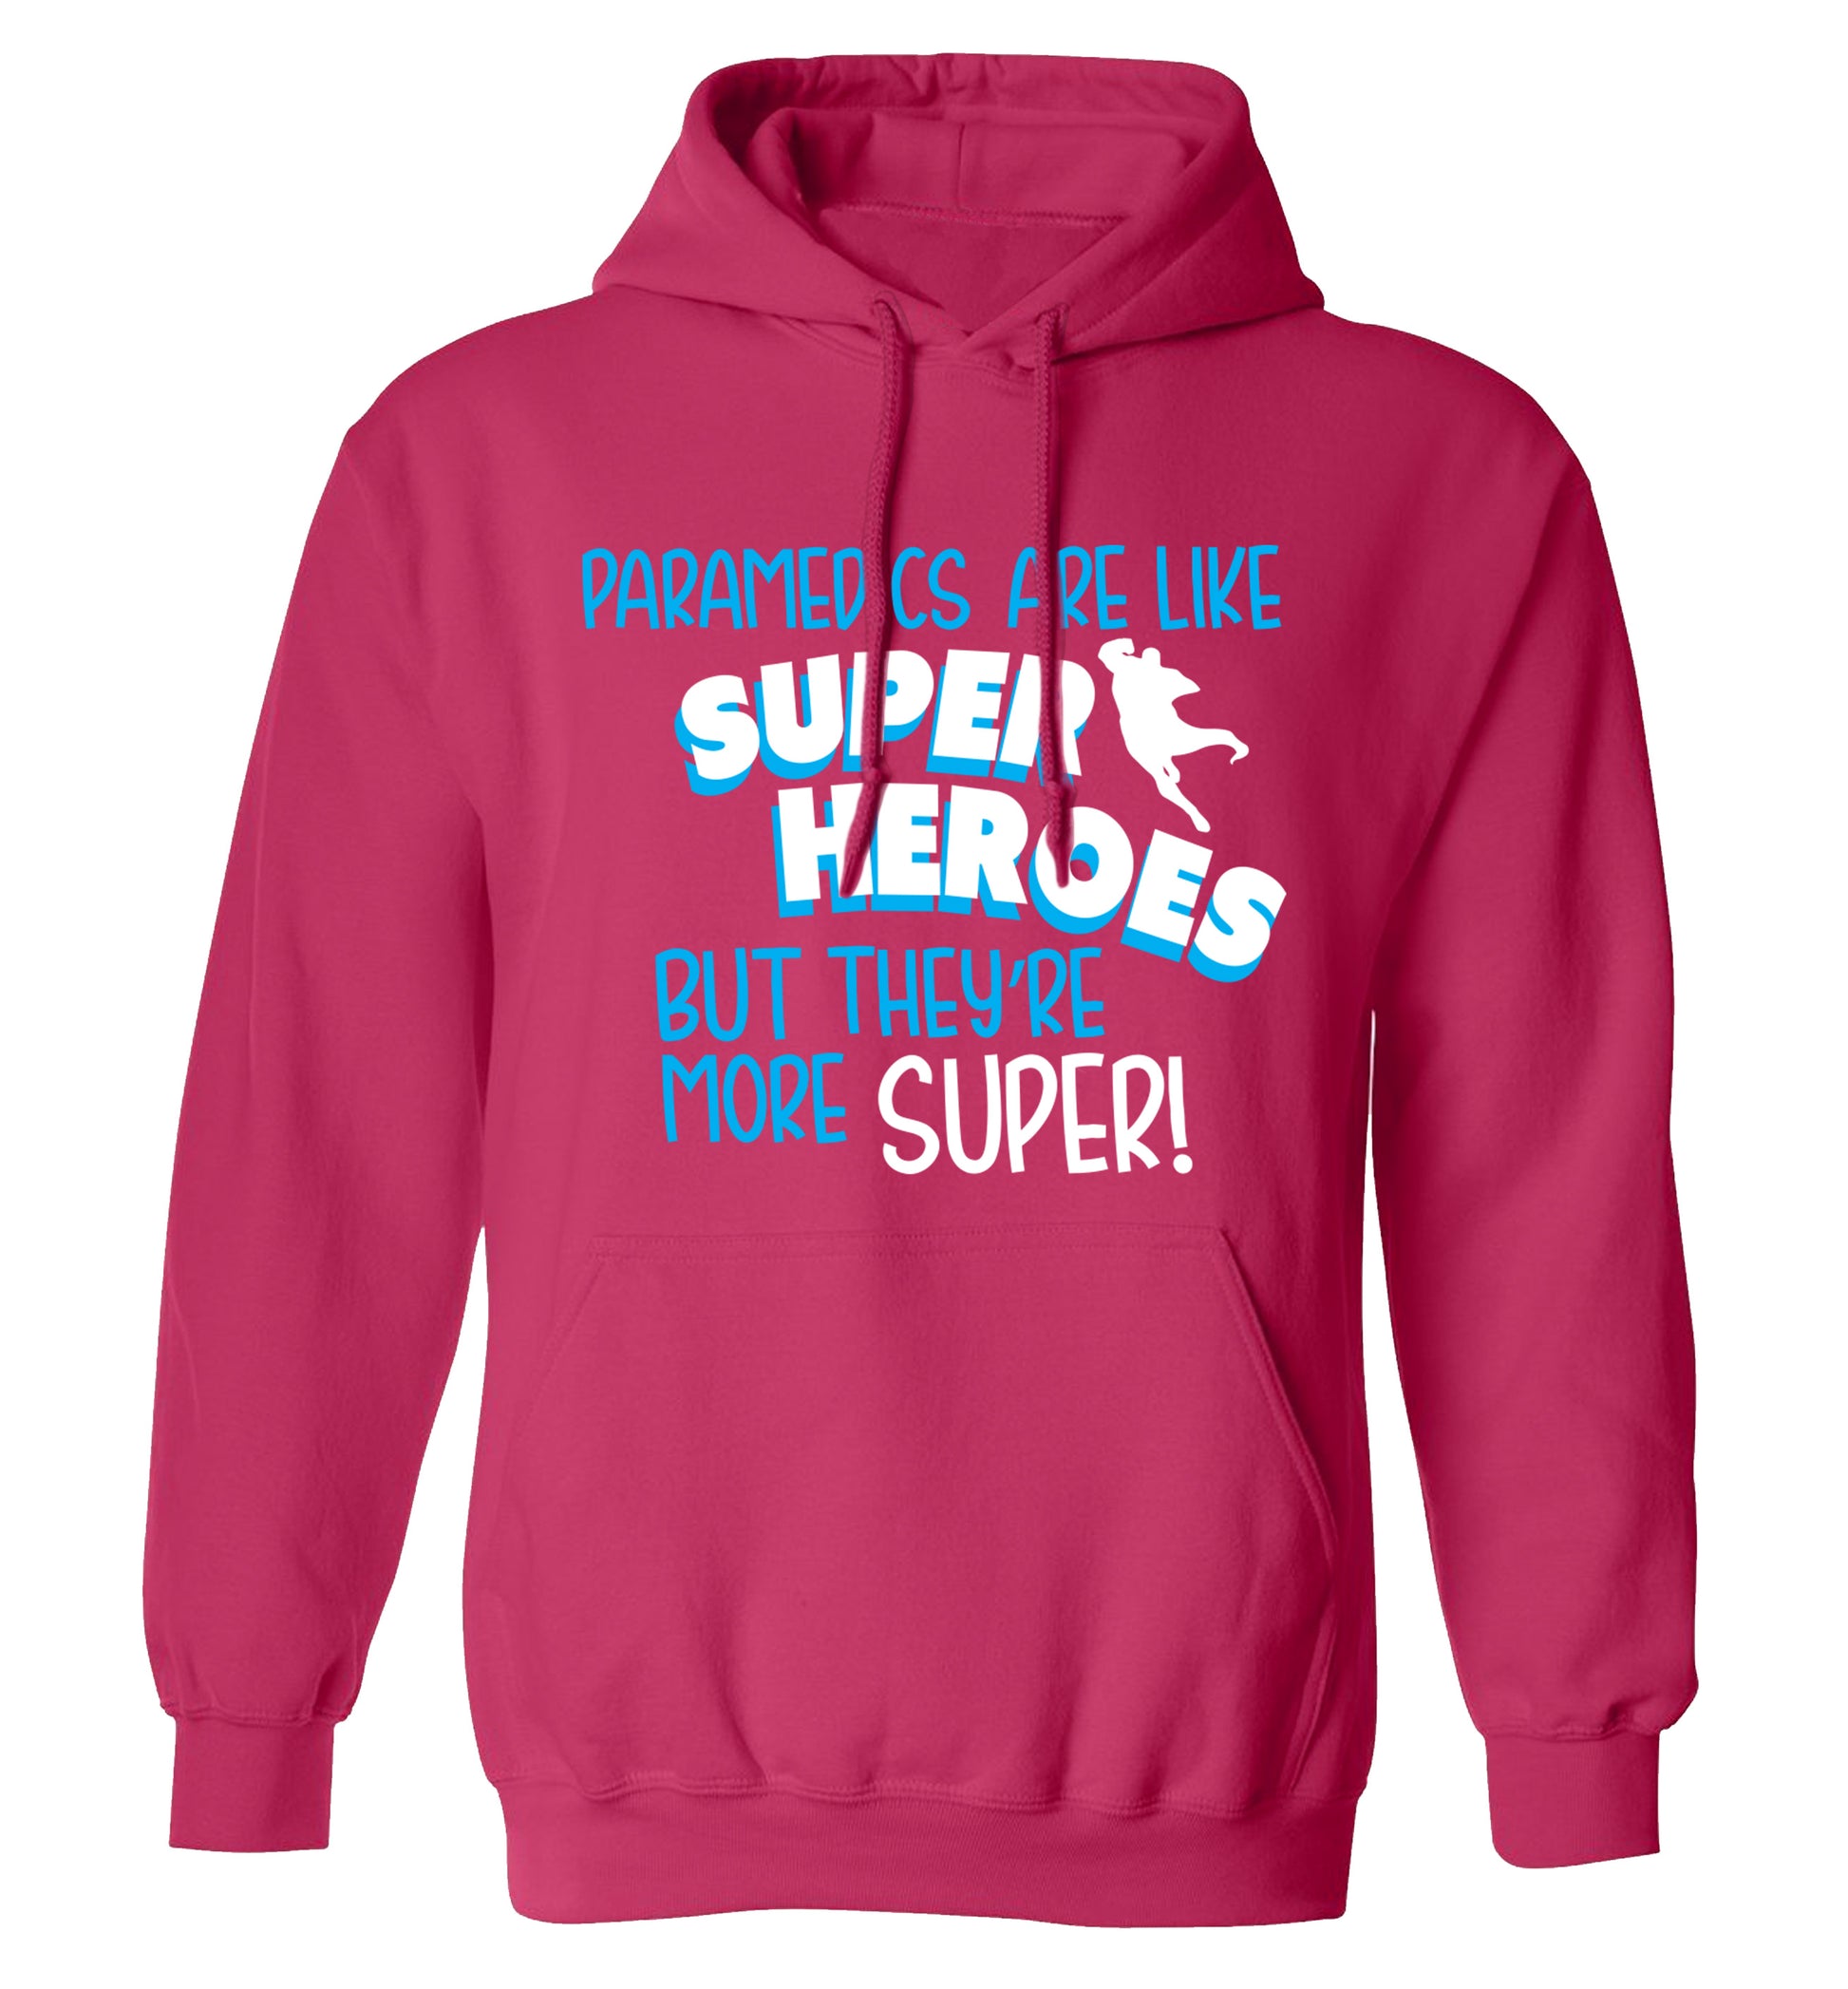 Paramedics are like superheros but they're more super adults unisex pink hoodie 2XL